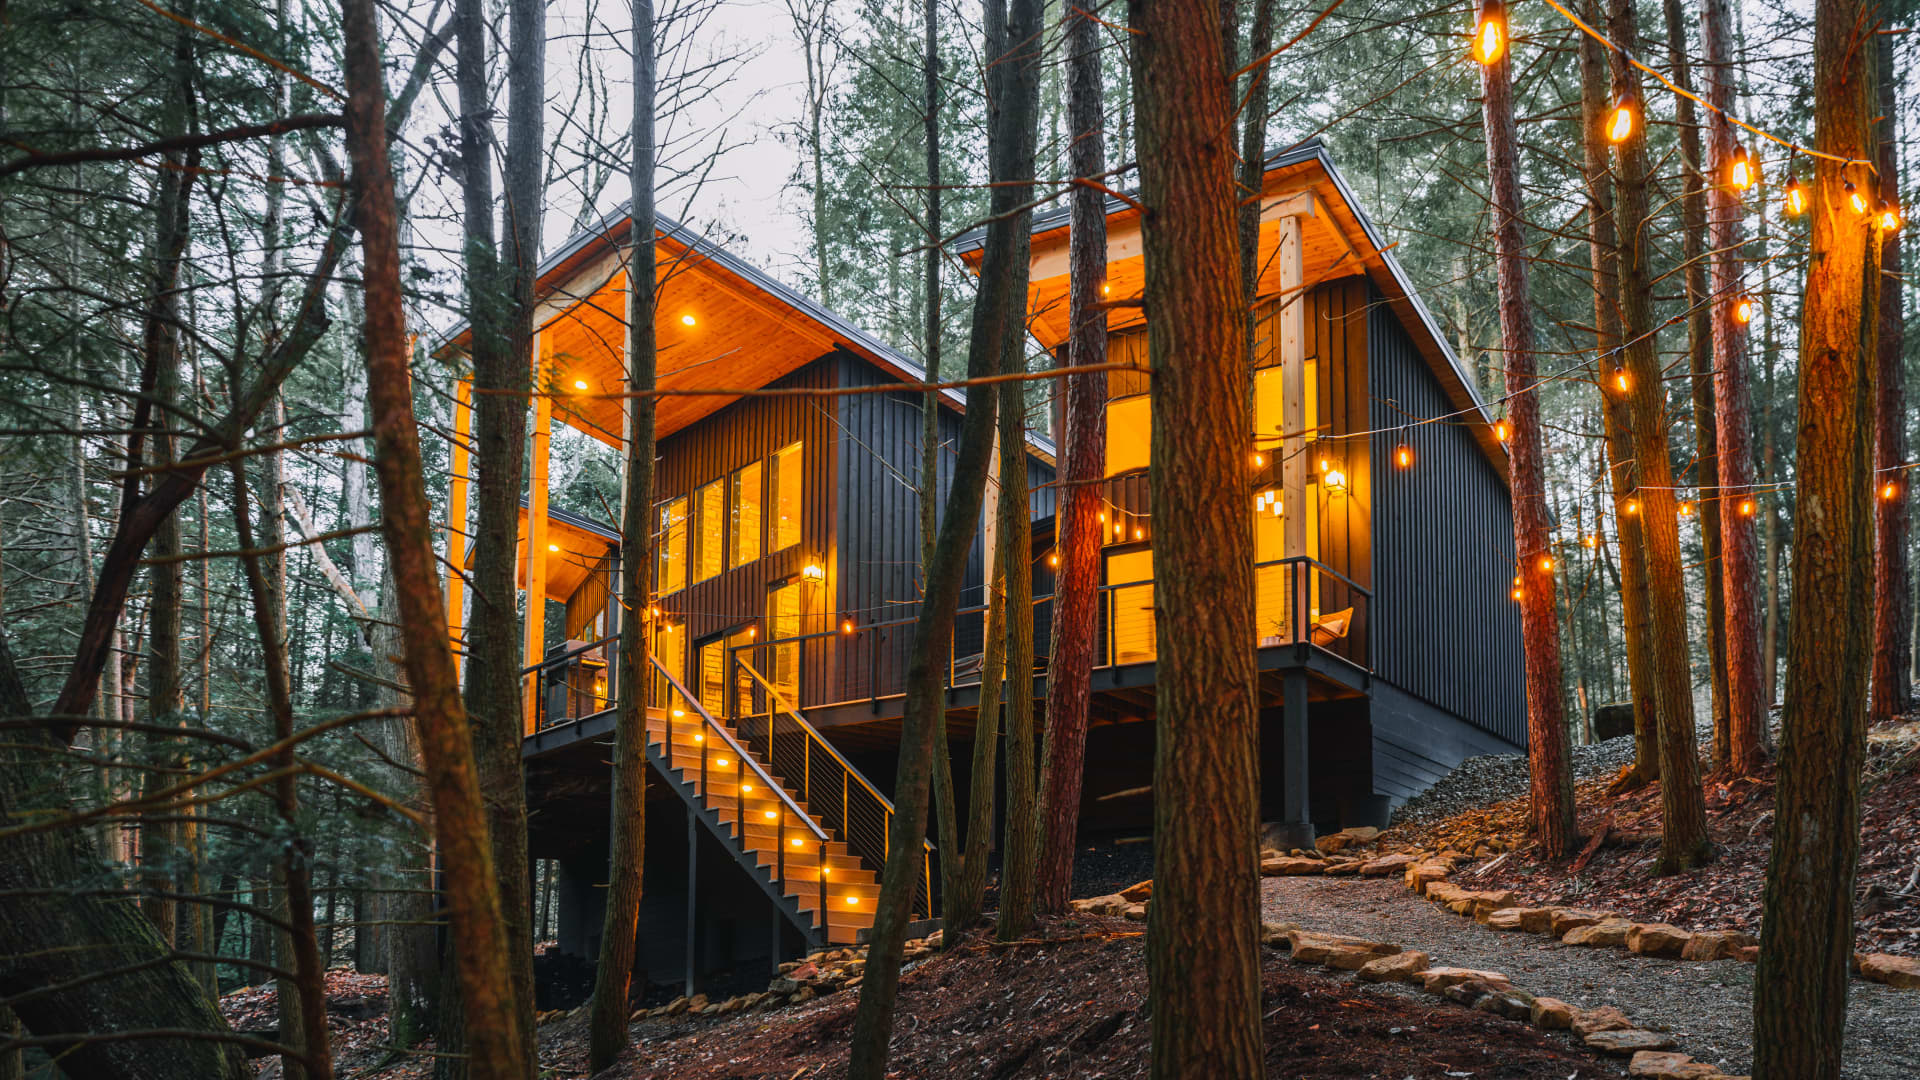 This Ohio cabin was just named one of the top 10 vacation rentals in the world—check it out